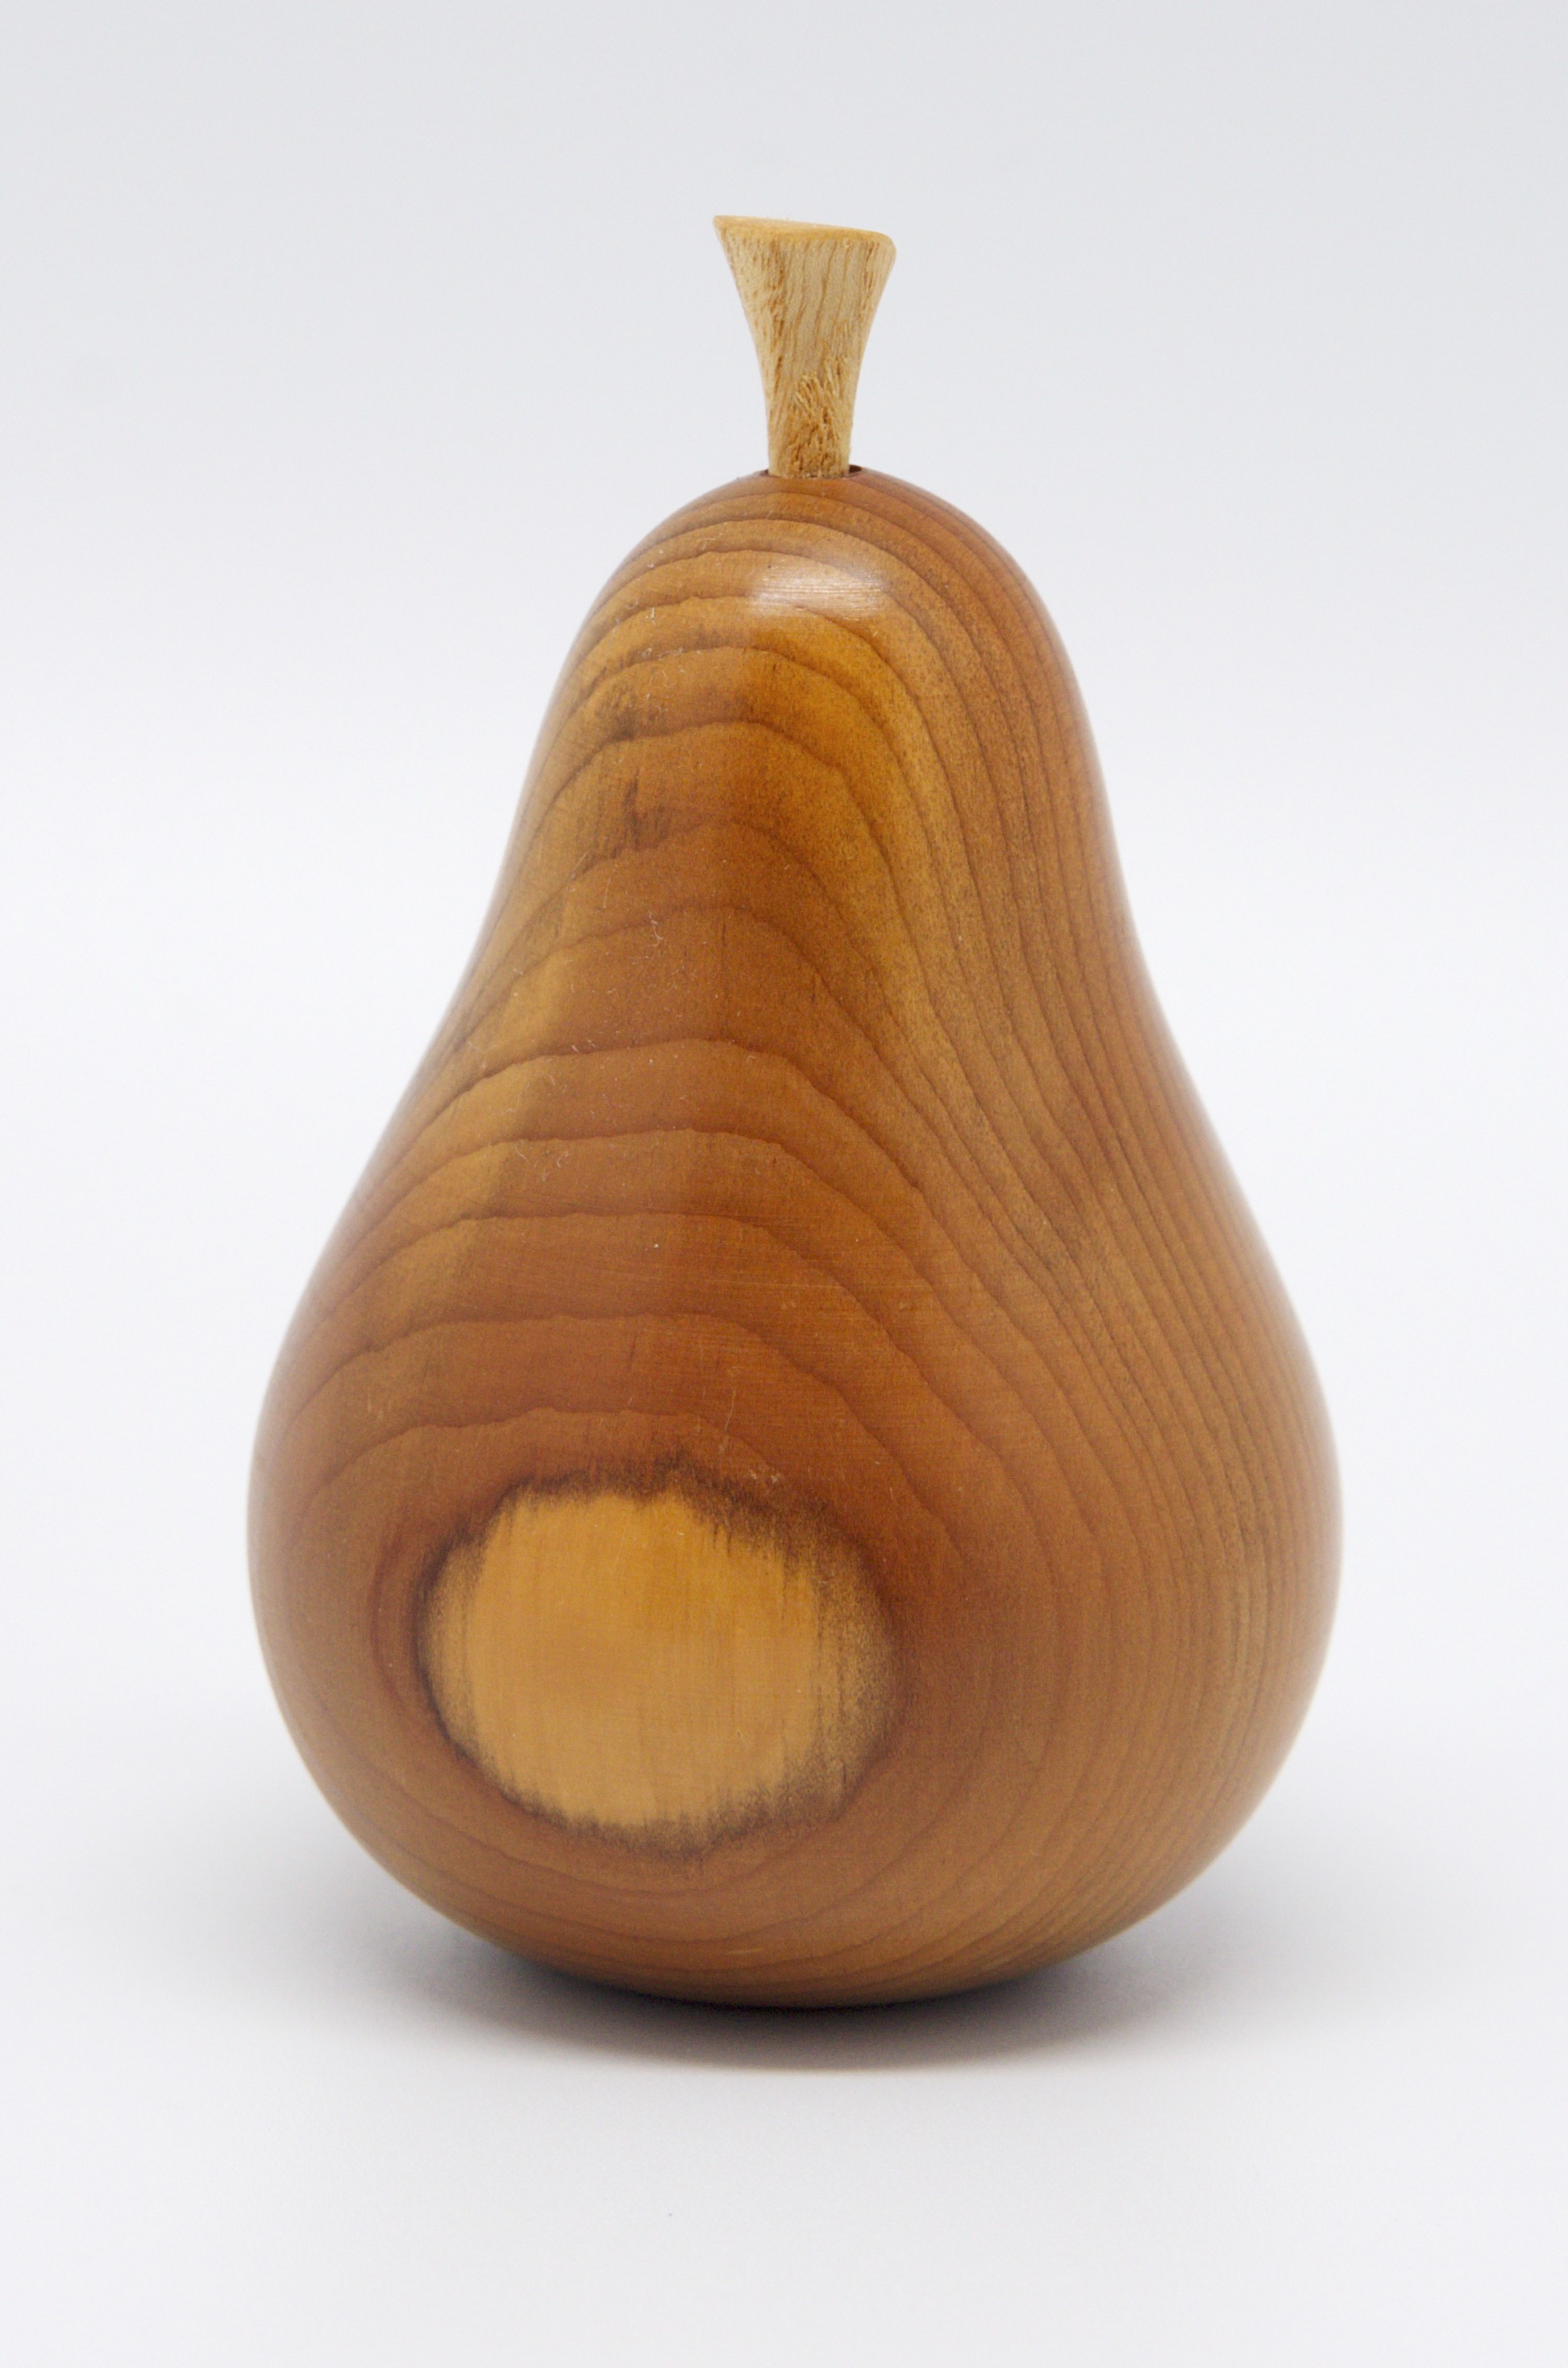 Wooden Pear Pictures Gallery - Freaking News